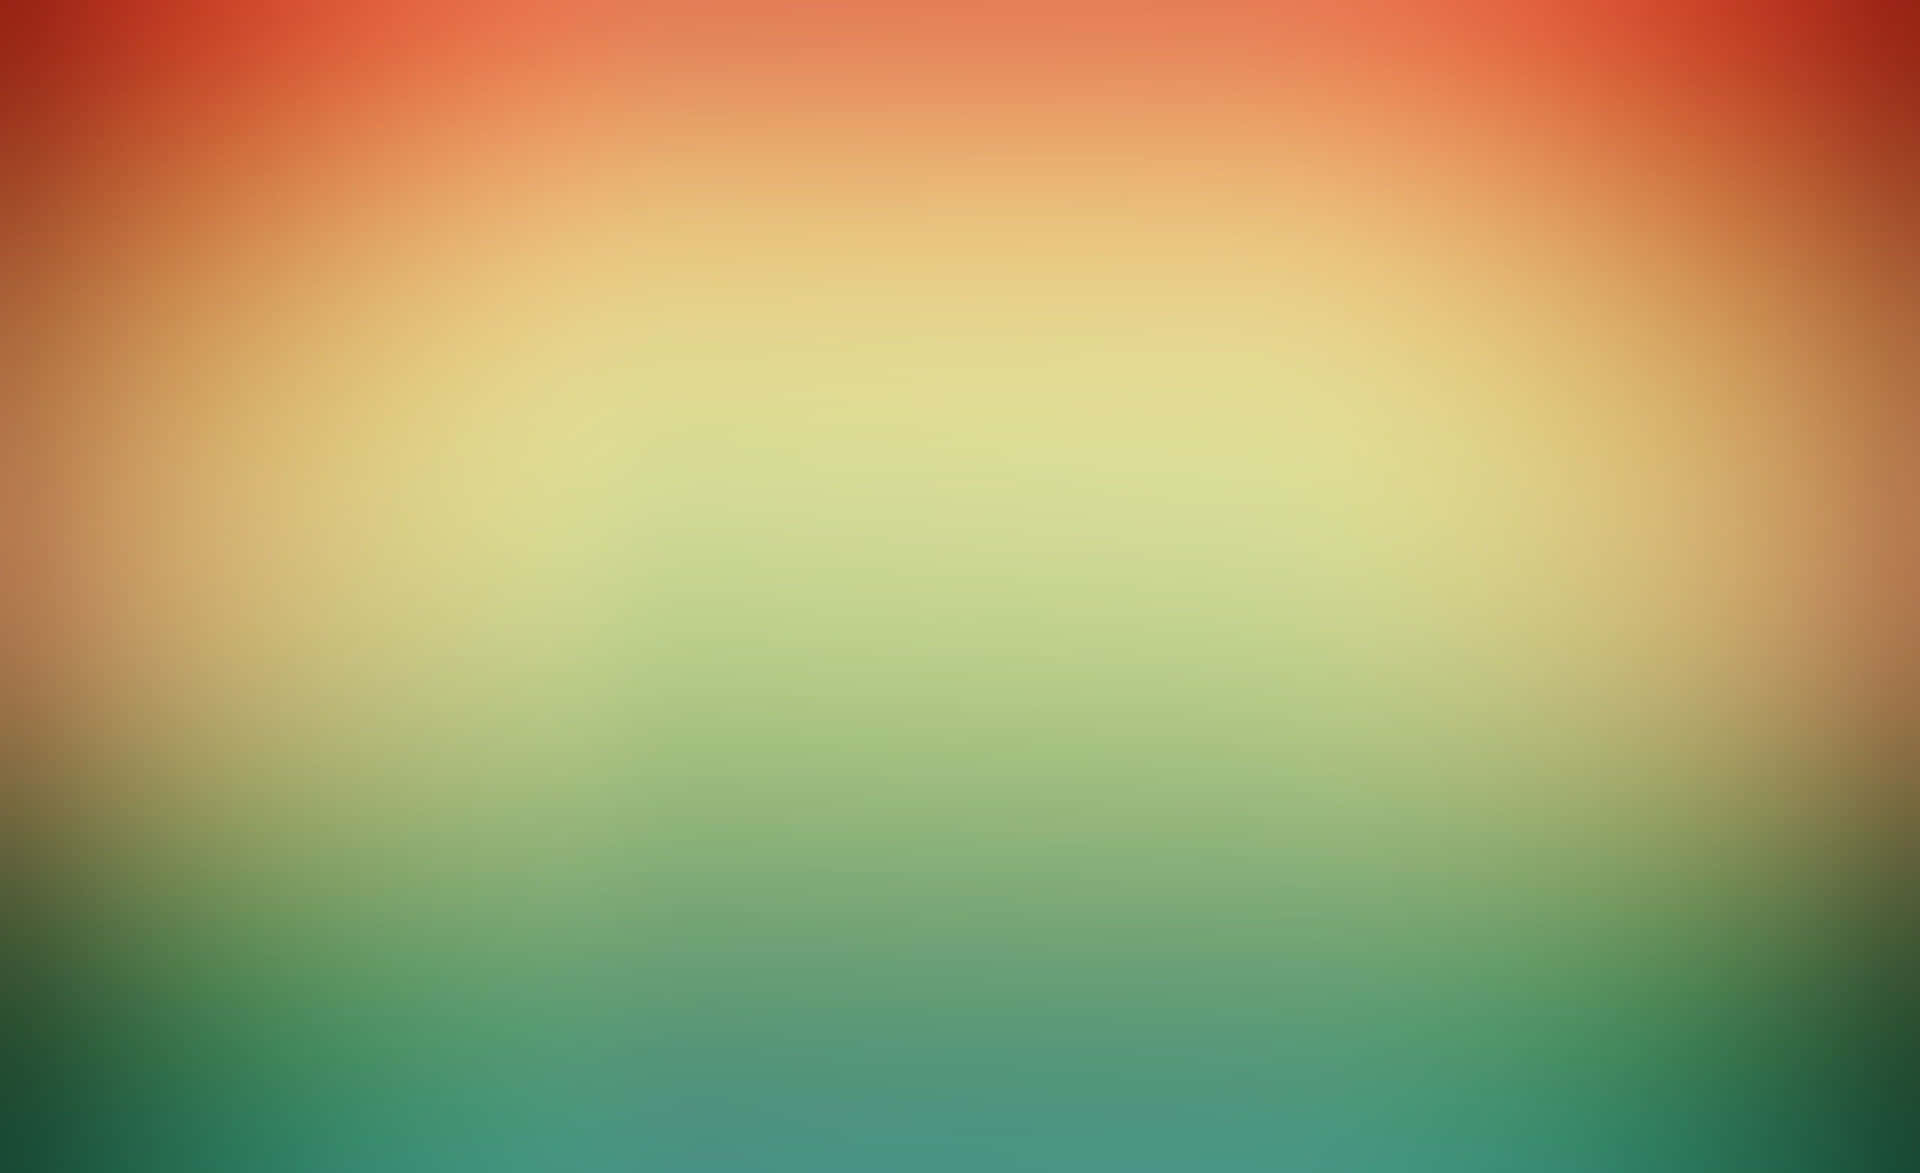 A Colorful Background With A Blurred Background